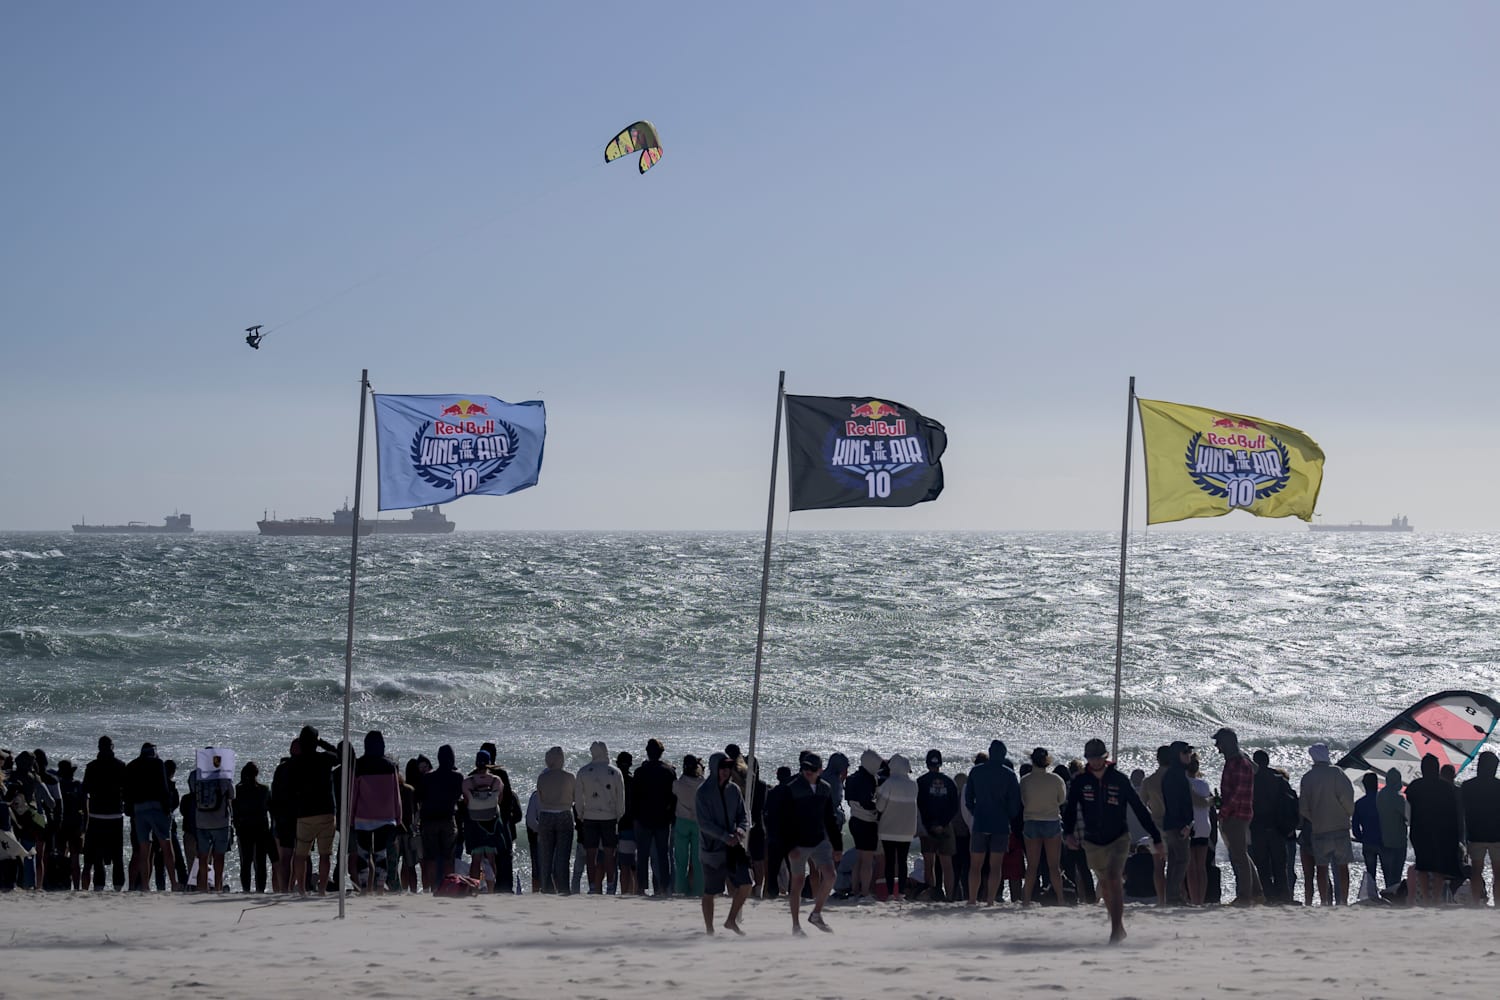 Ydeevne Majroe civilisere Red Bull King of the Air 2023: event info and videos